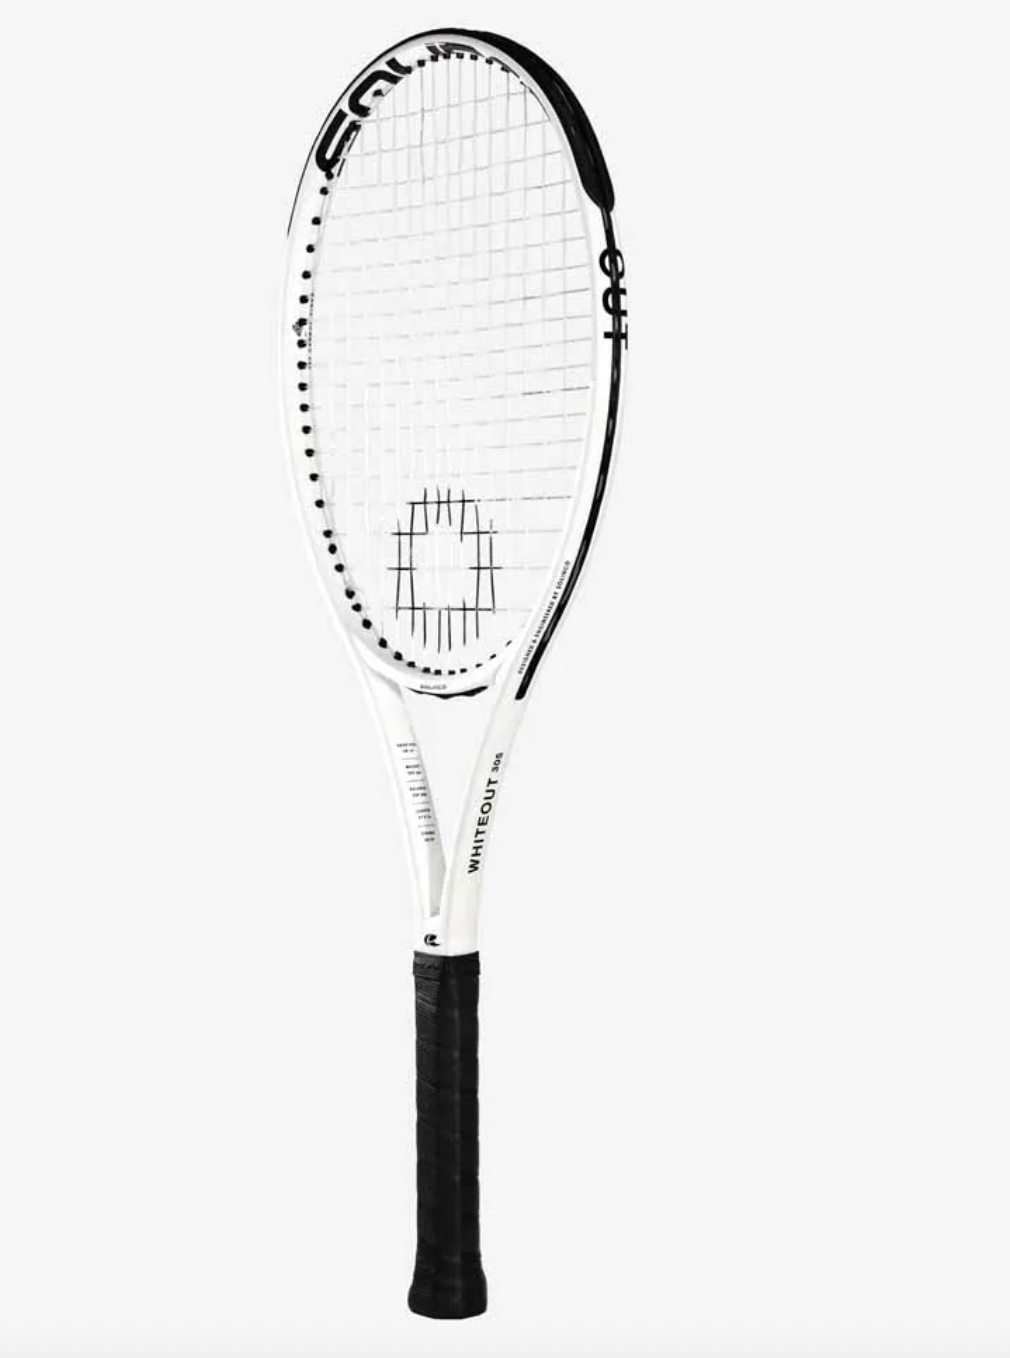 The WHITEOUT is designed to offer players with faster swing speeds a precise, control and feel-oriented racquet. 